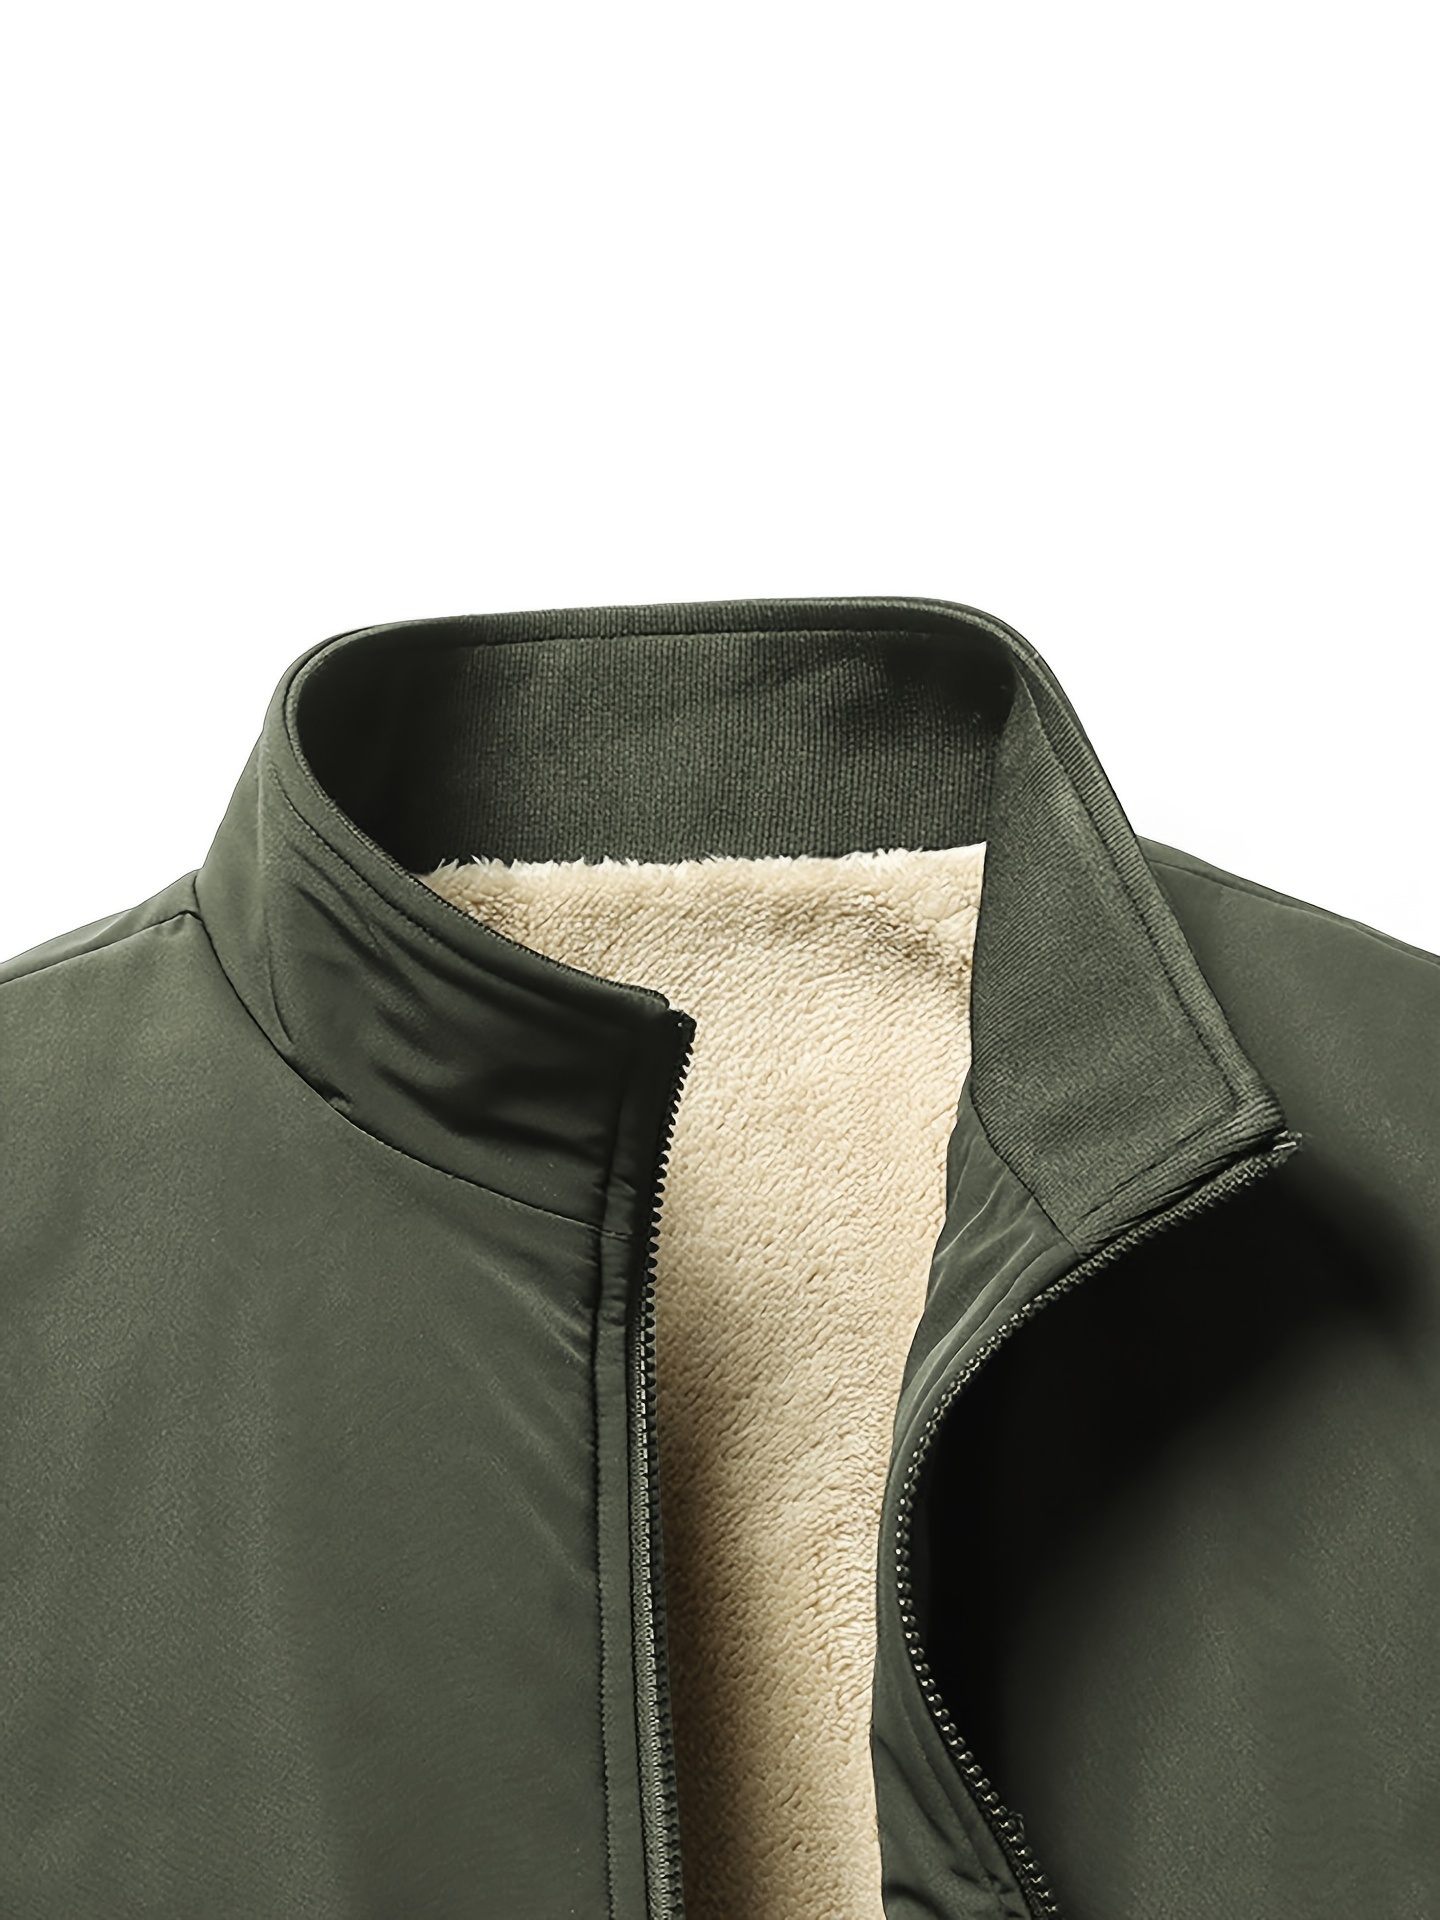 warm stand collar fleece jacket mens casual comfortable solid color zip up coat outwear for fall winter army green 4